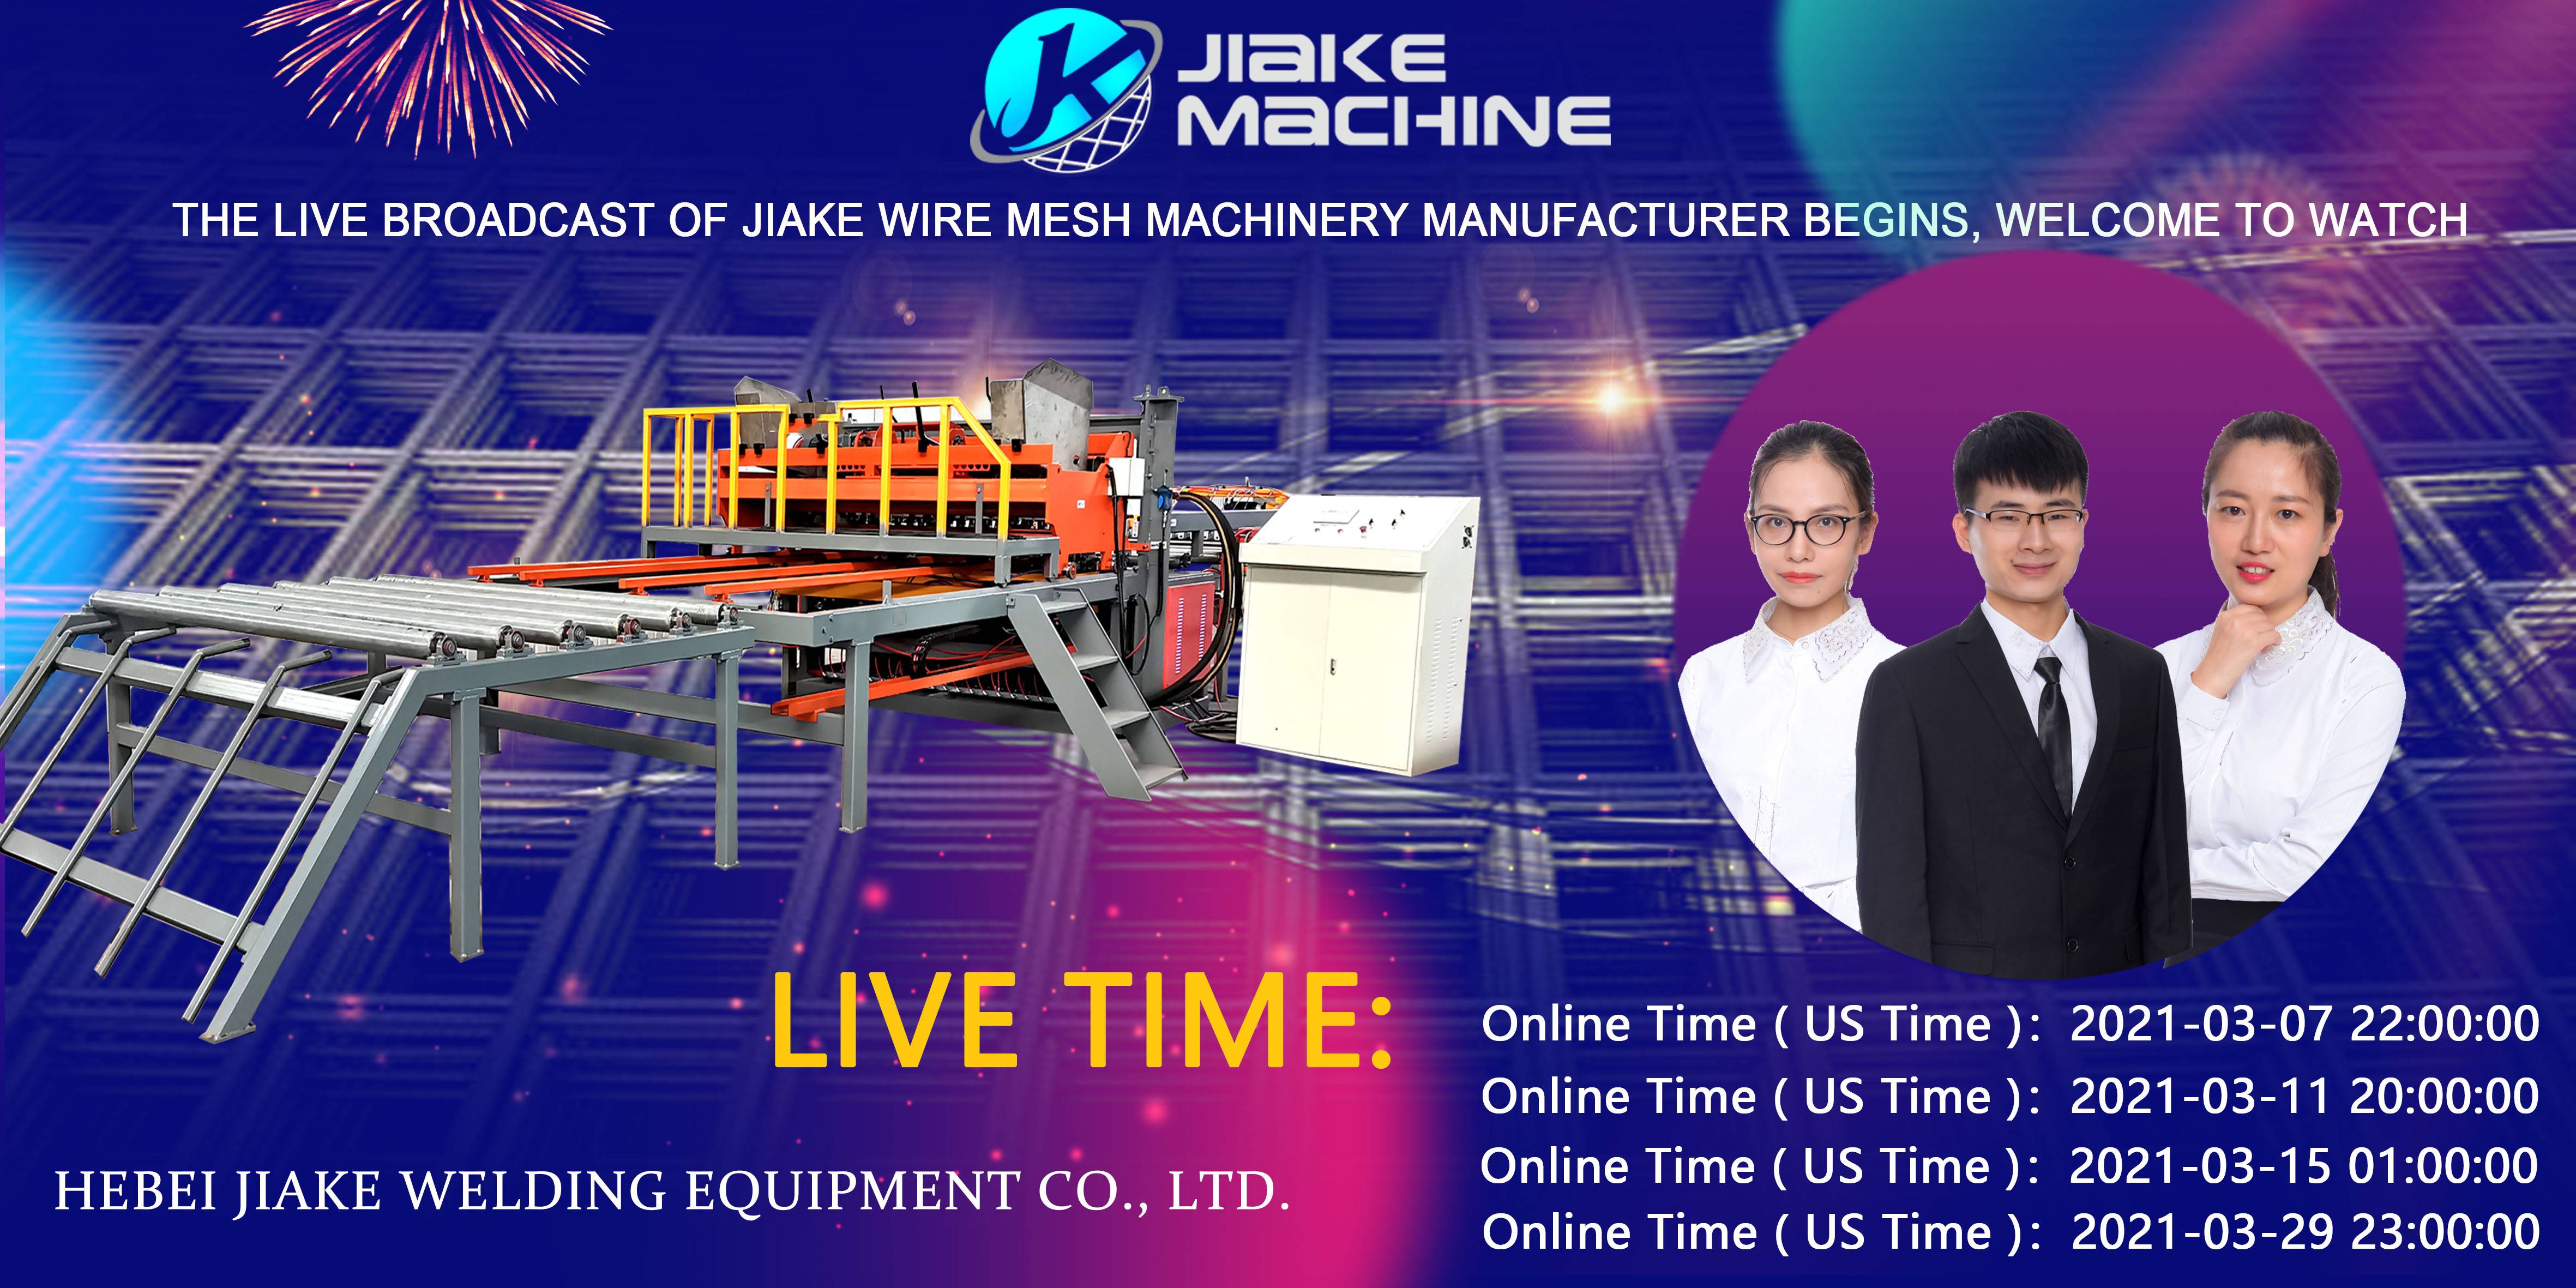 The live broadcast of Jiake Wire Mesh Machinery is coming in March,welcome to watch